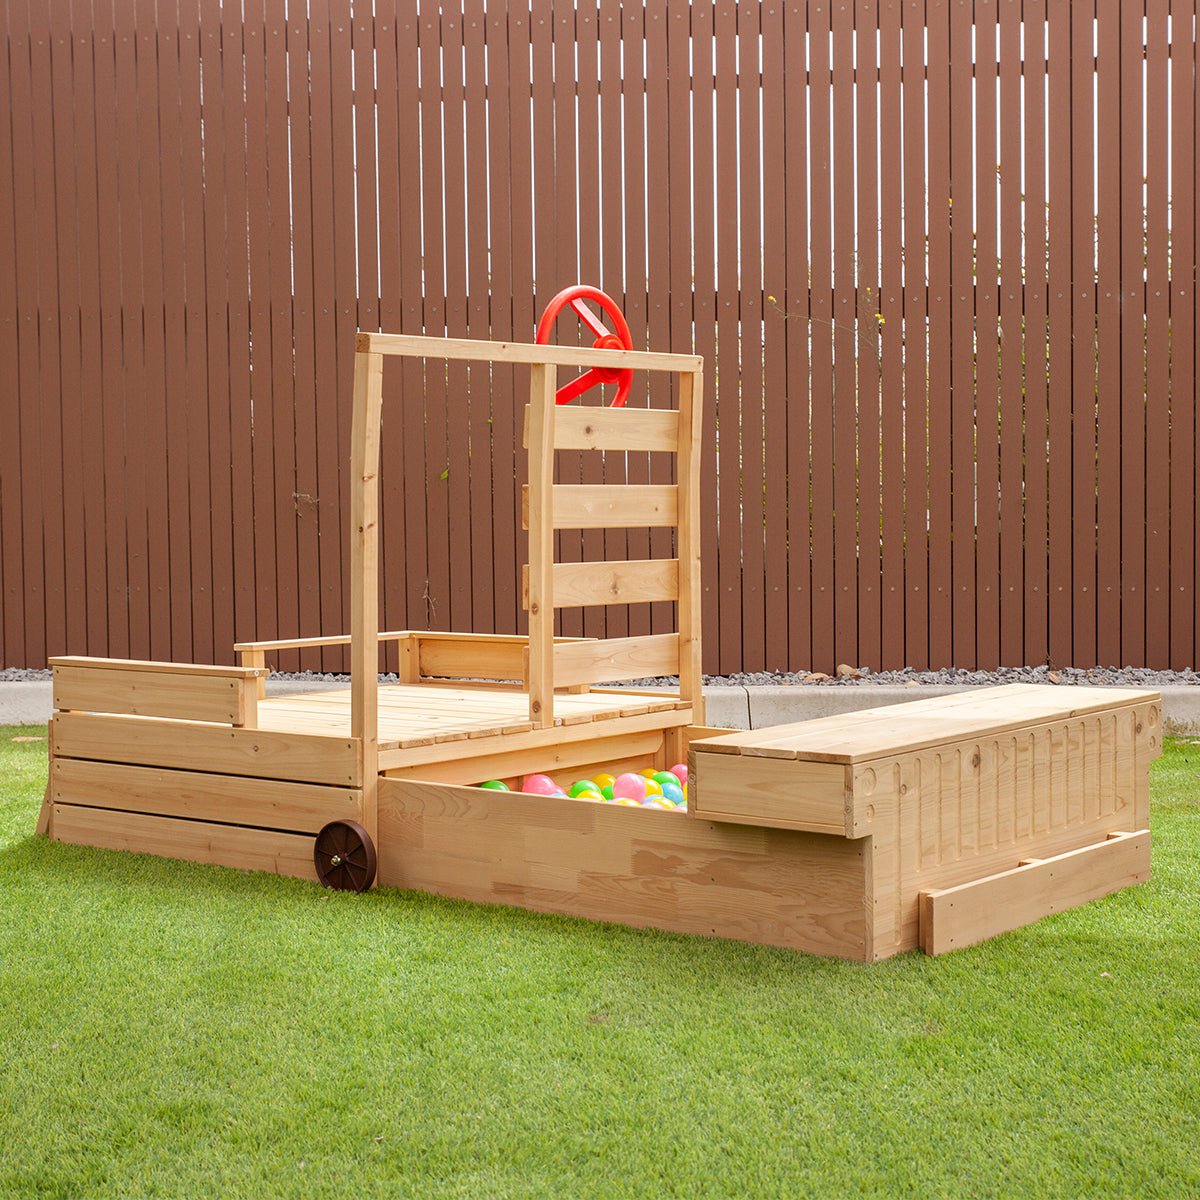 Shop Wrangler Sand Pit: Transform Your Outdoor Space into Play Heaven